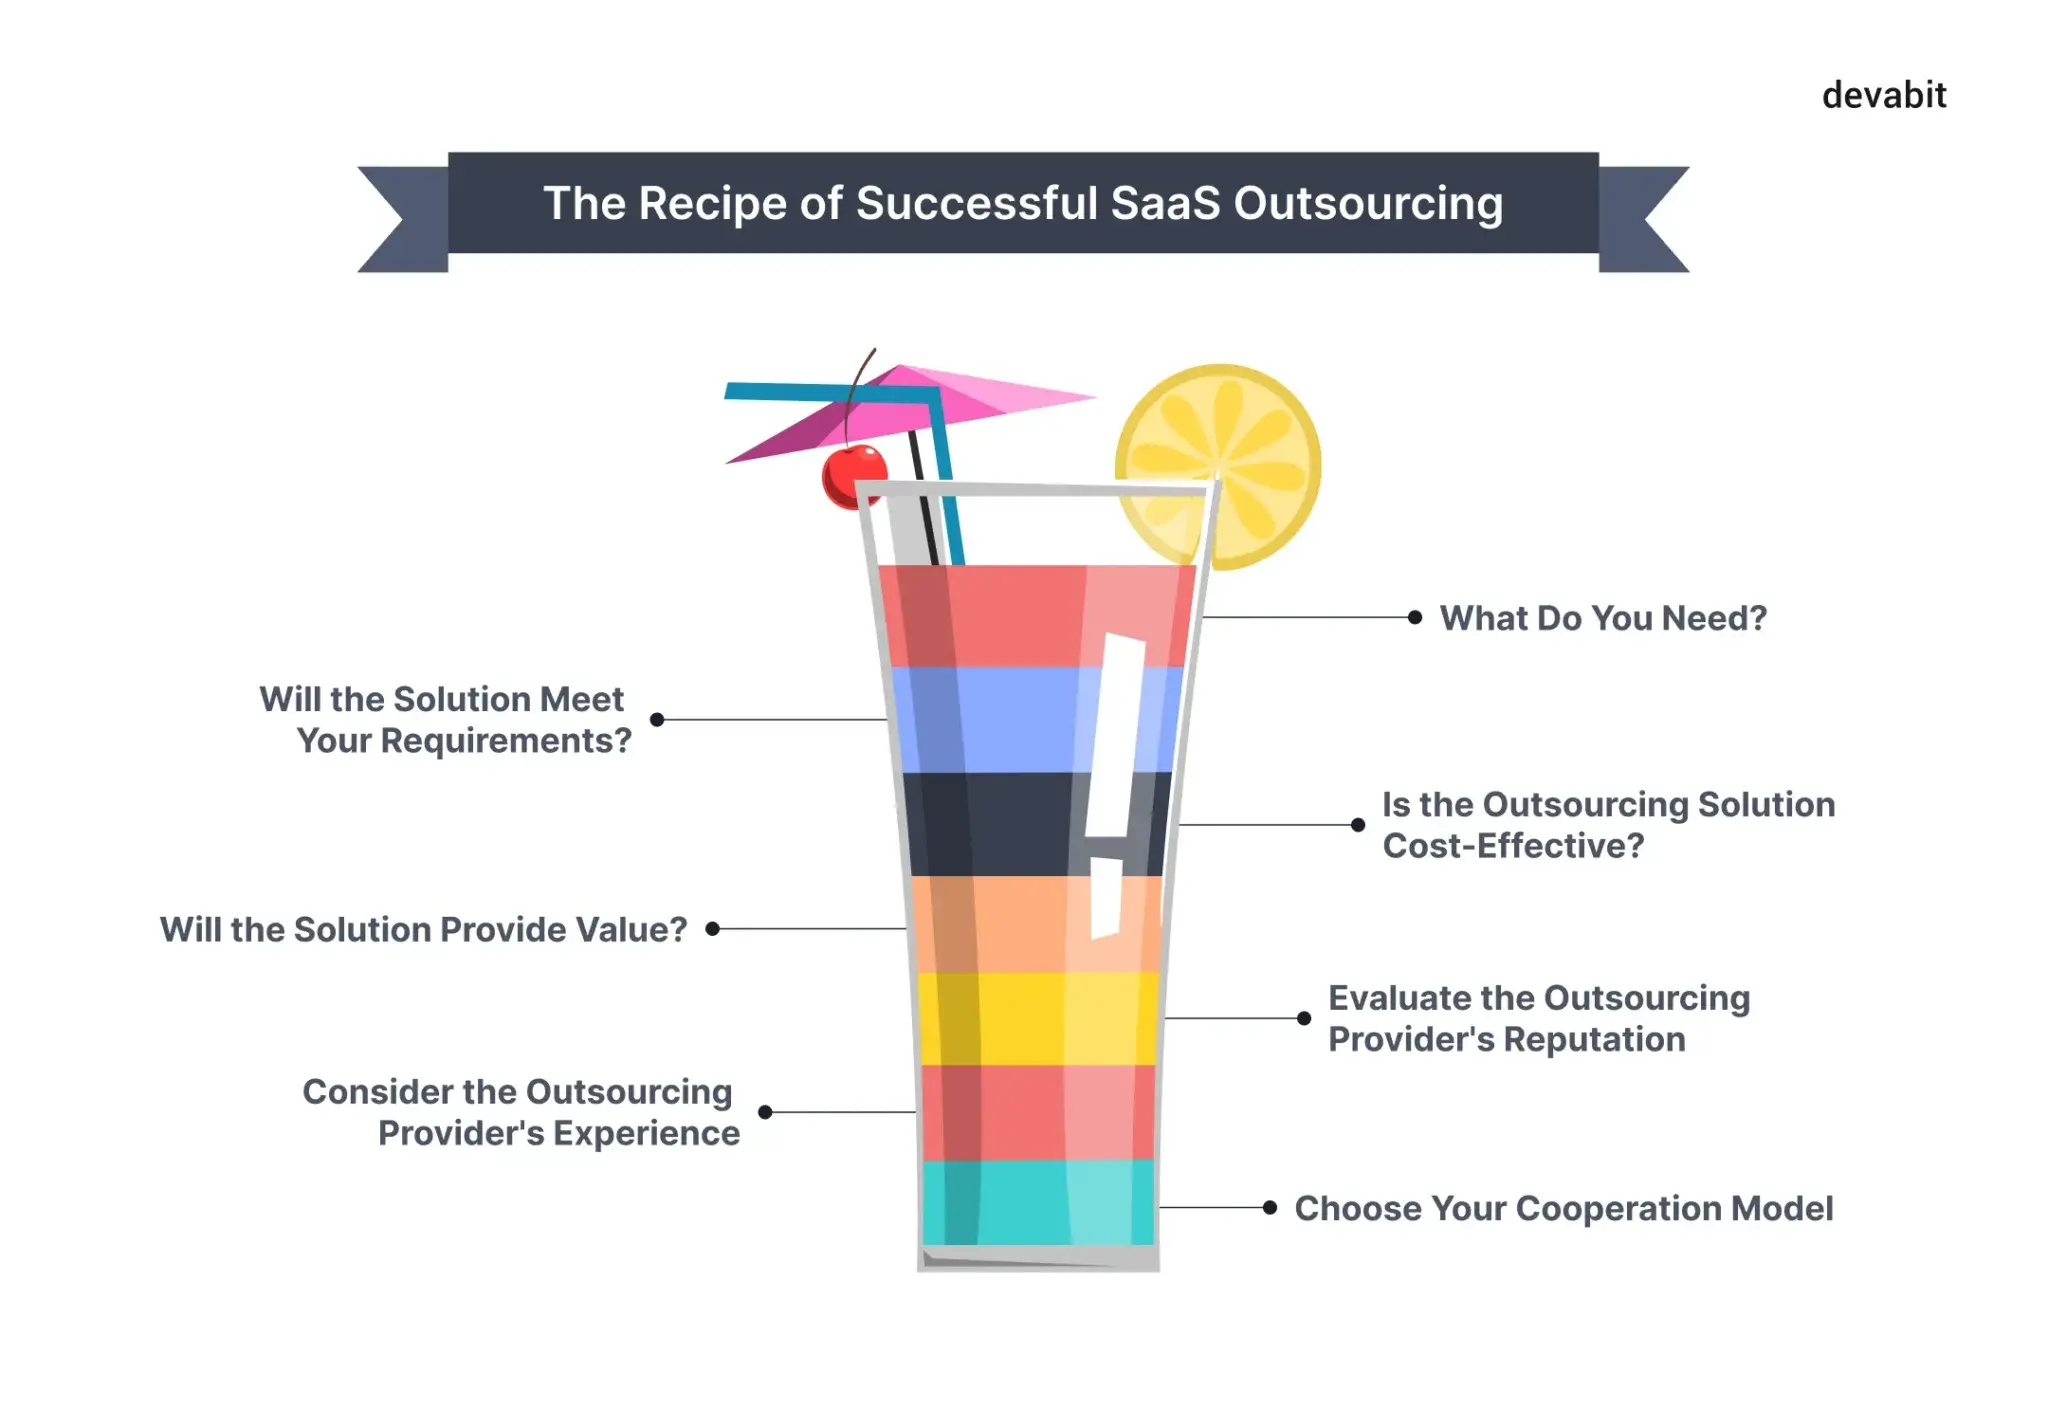 The recipe of successful SaaS outsourcing